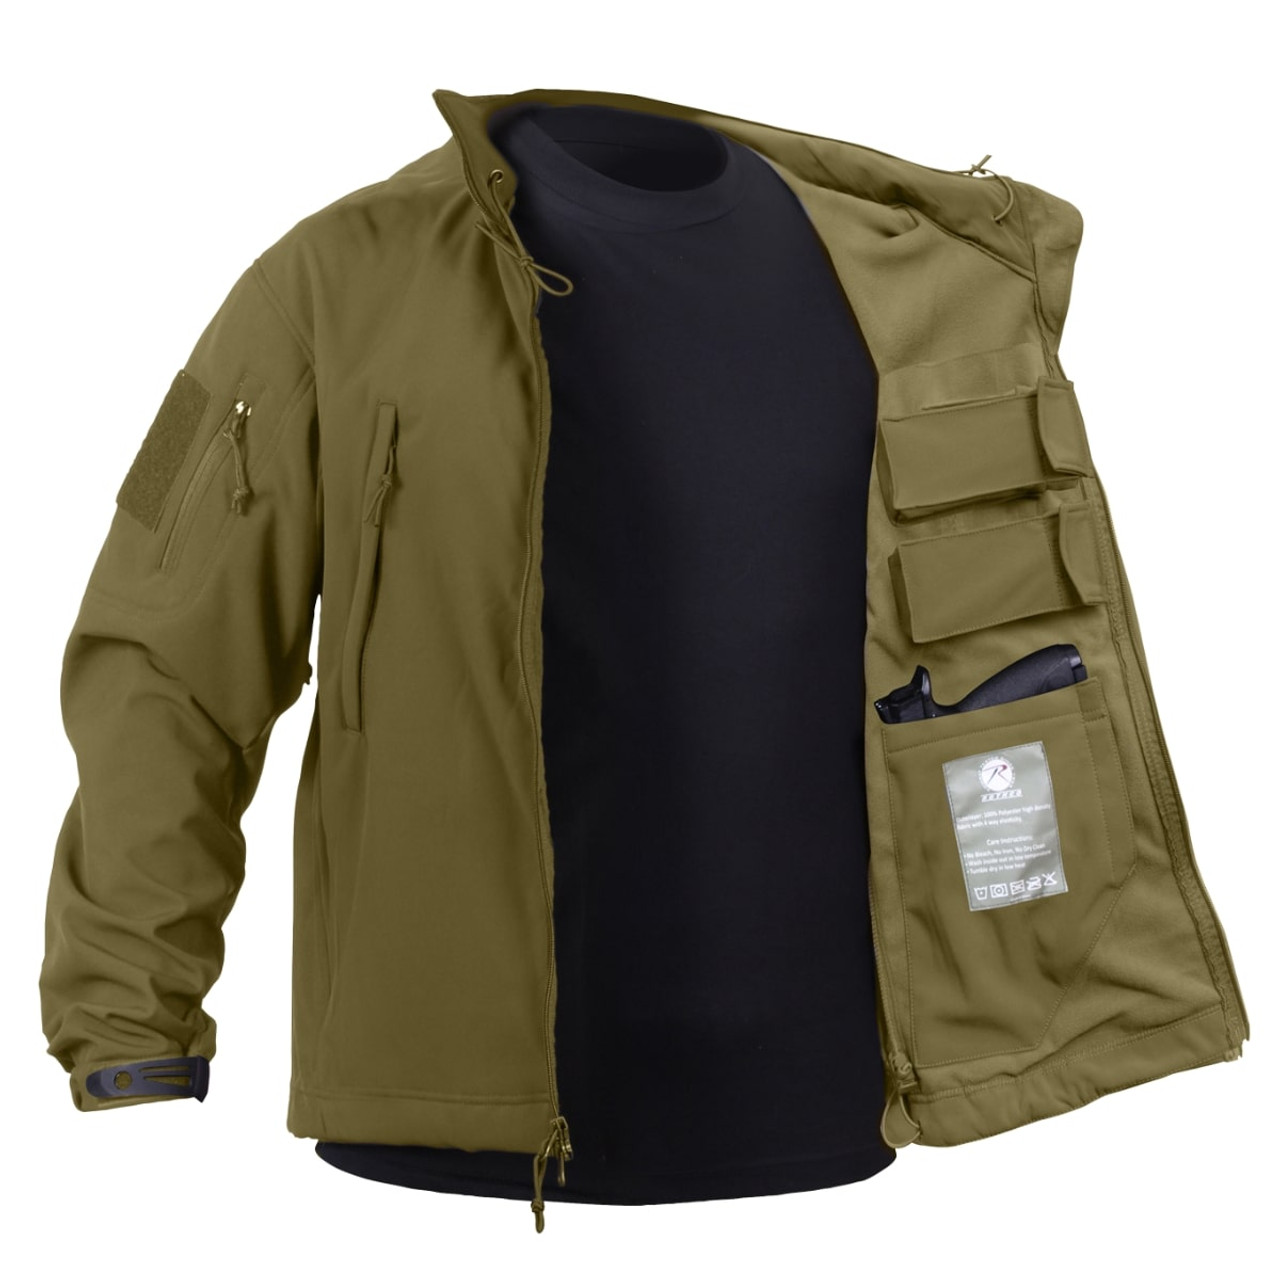 Rothco Concealed Carry Soft Shell Tactical Jacket